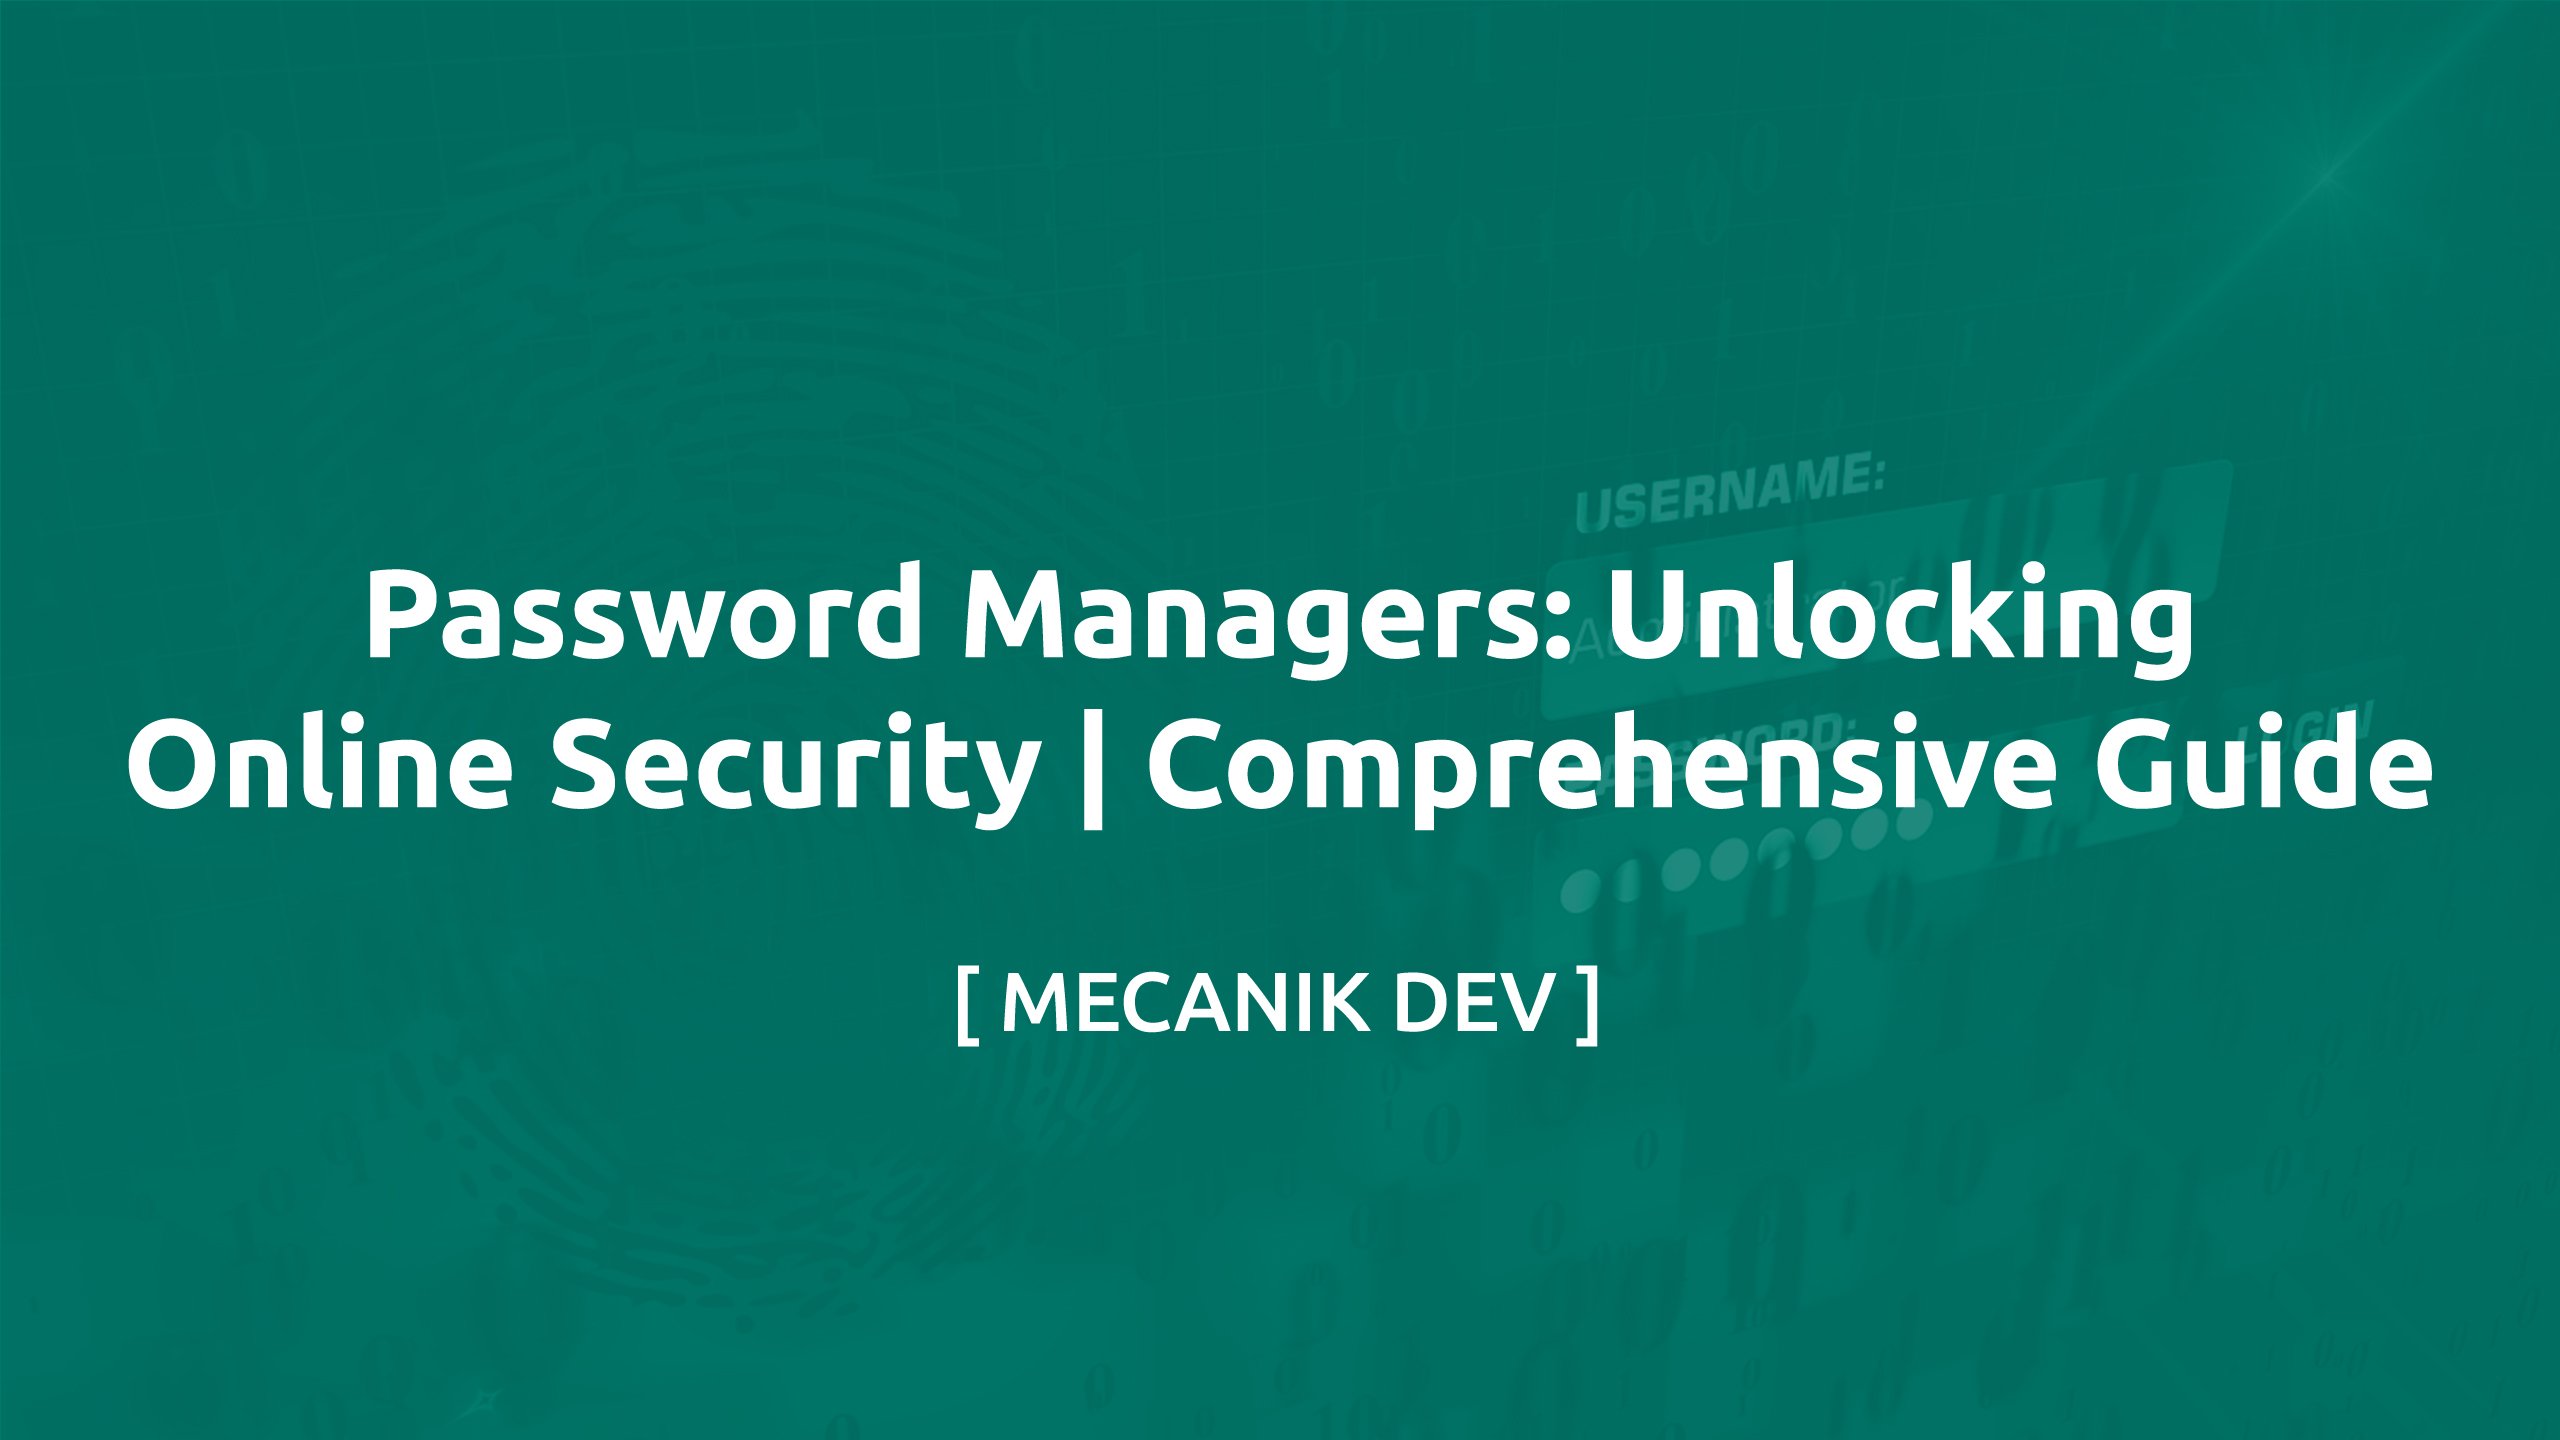 Password Managers: Unlocking Online Security | Comprehensive Guide